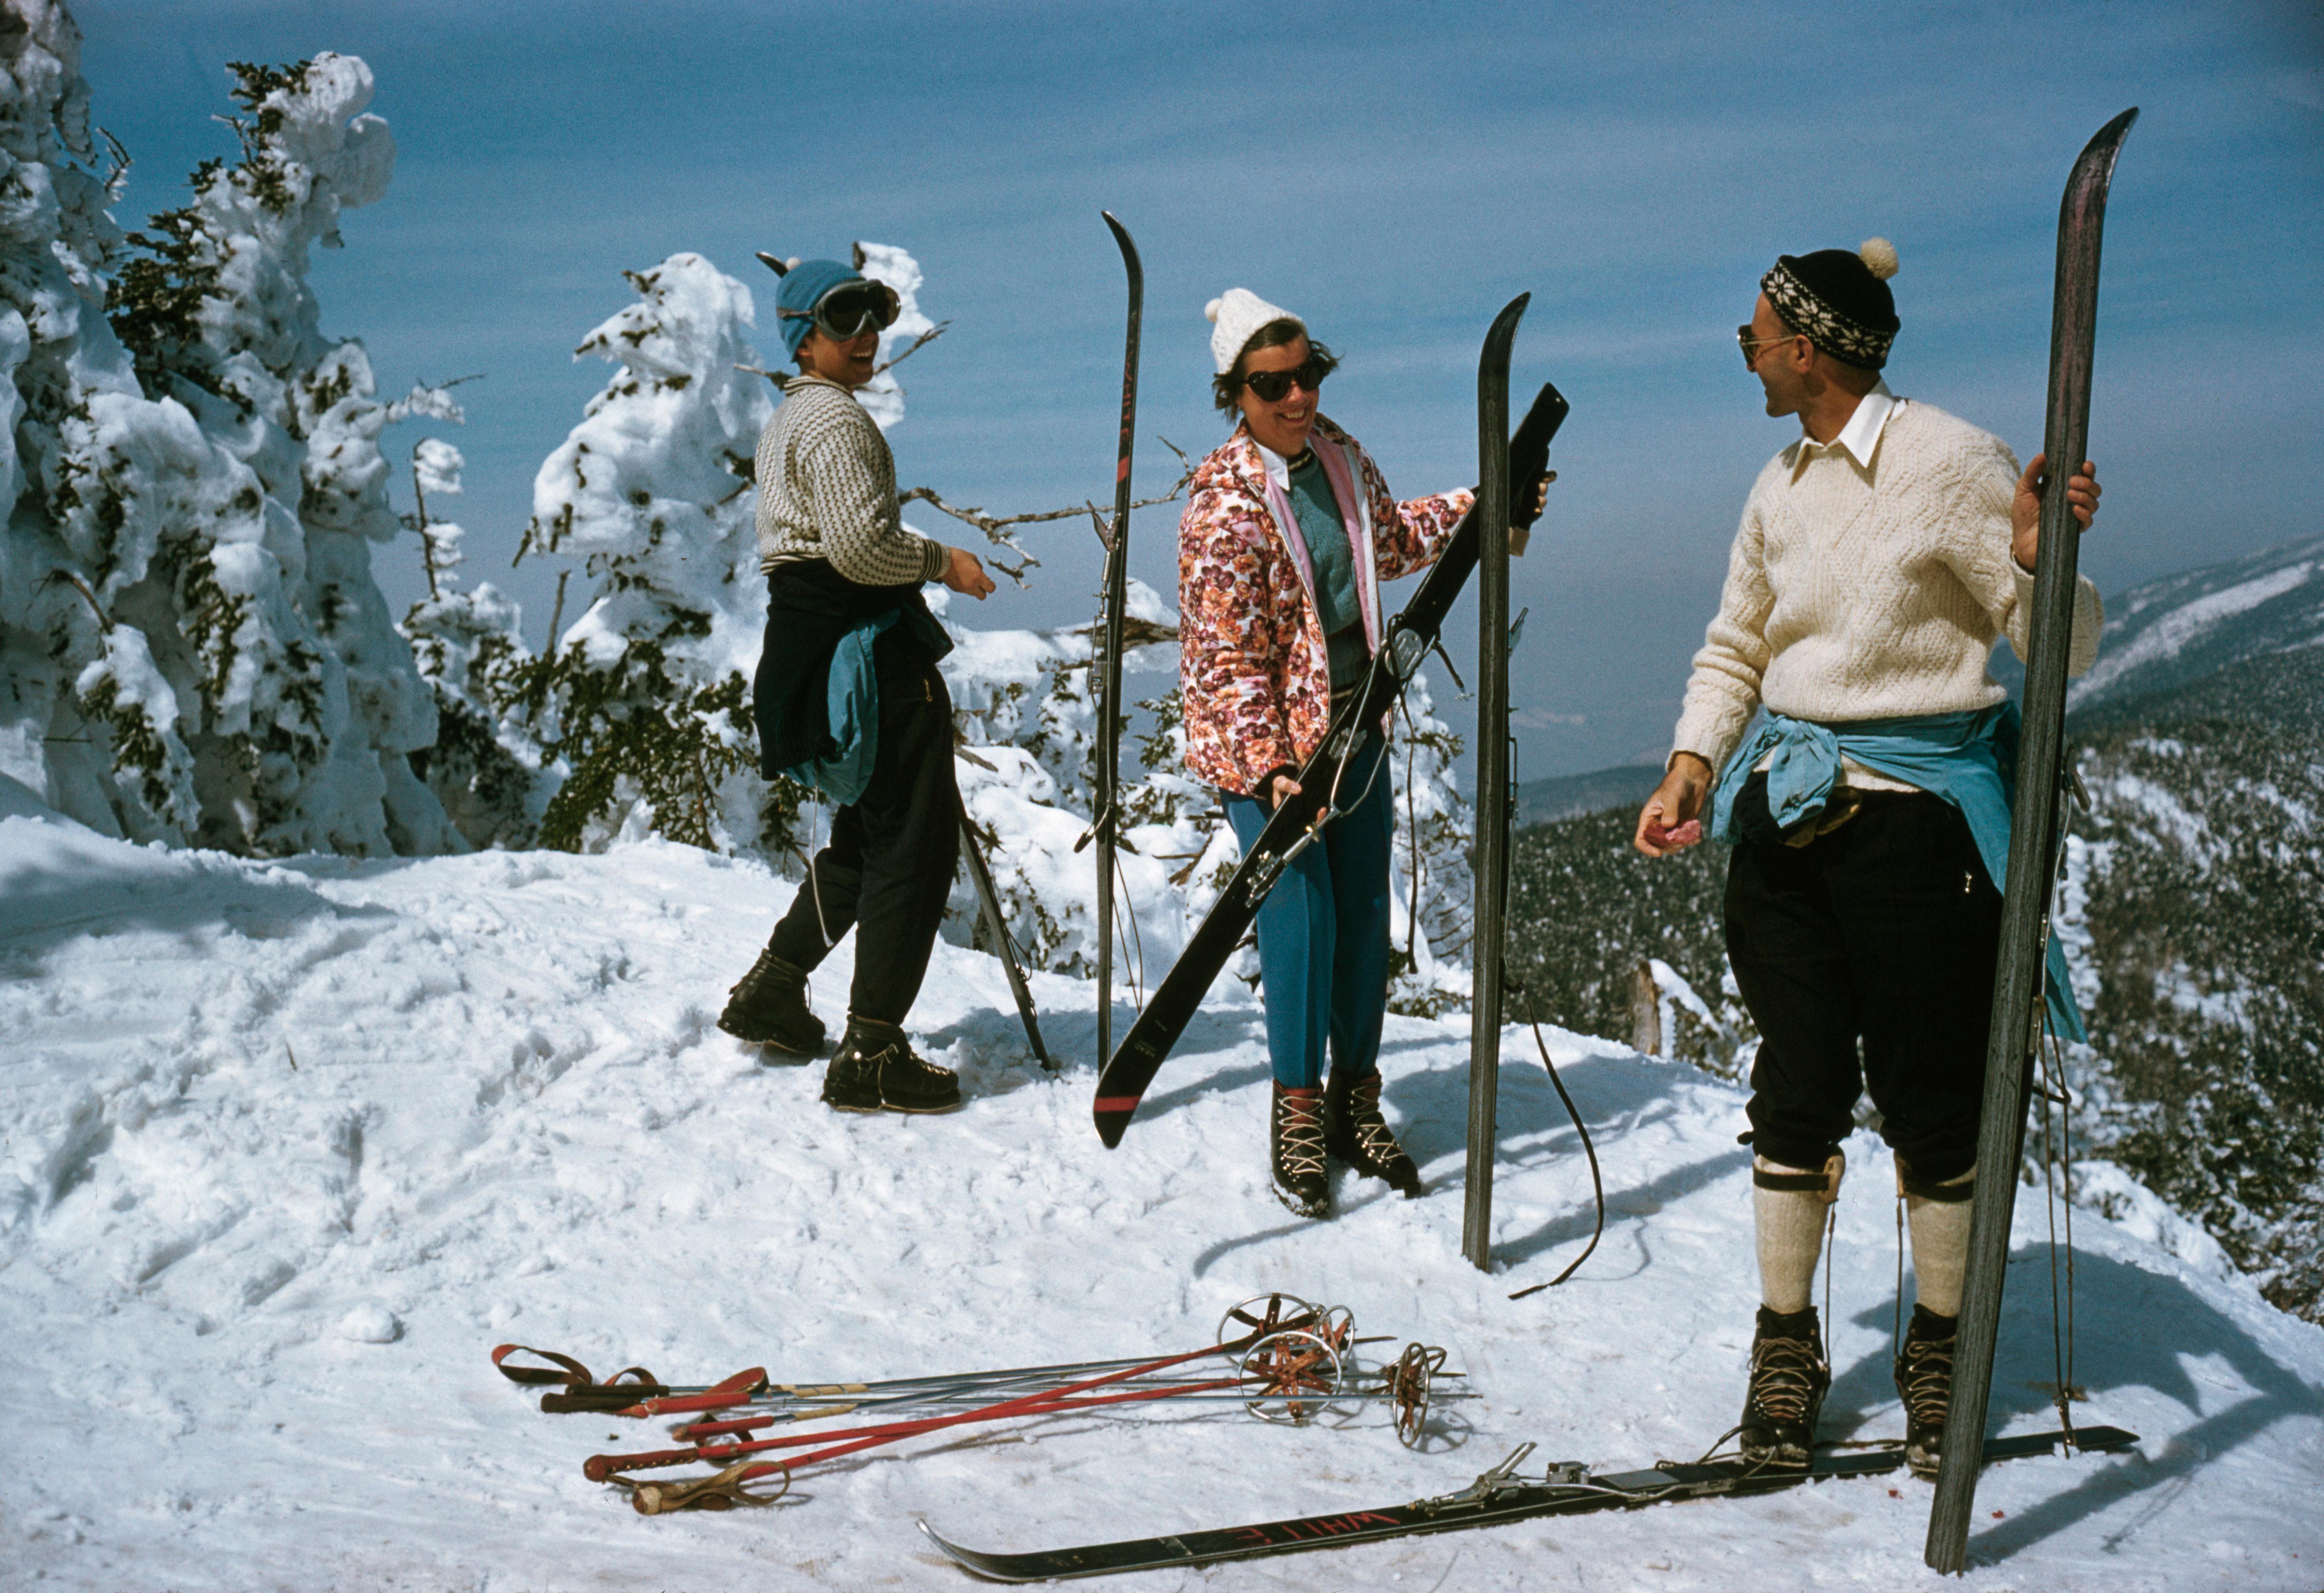 Slim Aarons
Skiing at Sugarbush
1960 (printed later)
C print 
Estate stamped and numbered edition of 150 
with Certificate of authenticity

Skiing at Sugarbush, a mountain resort in Vermont, April 1960.

Slim Aarons (1916-2006) worked mainly for